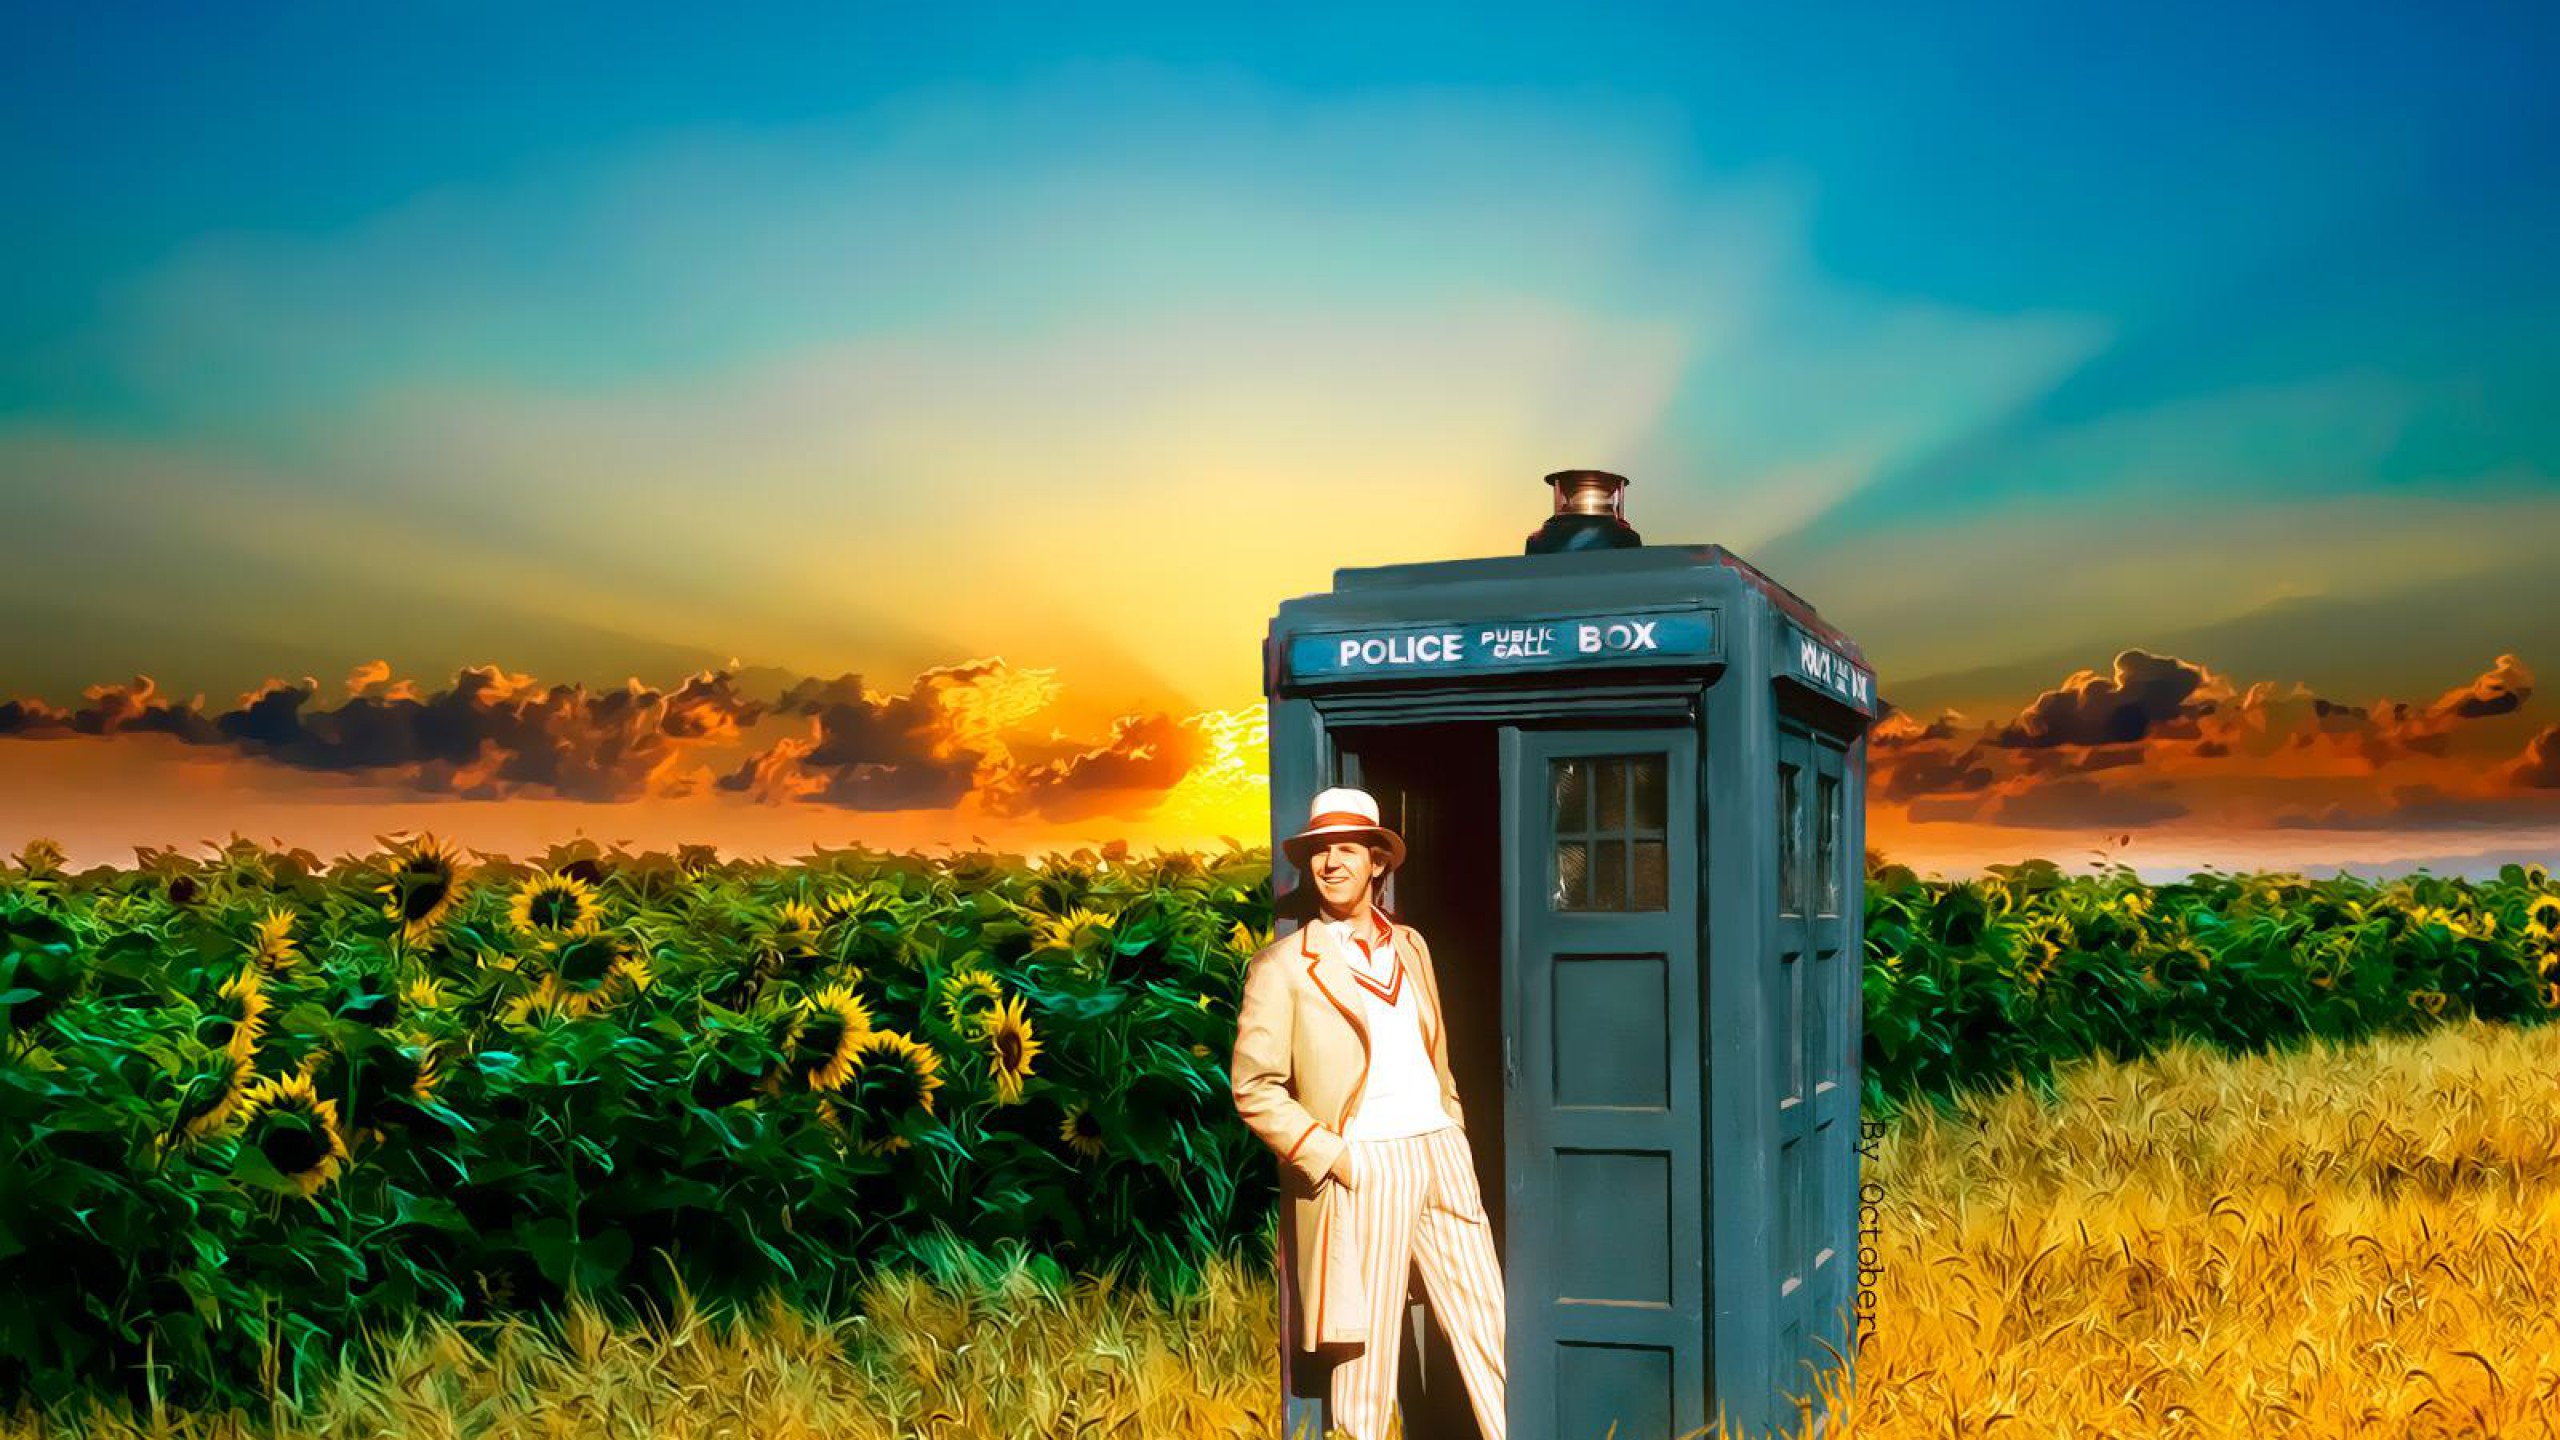 dr who Computer Wallpapers, Desktop Backgrounds | 2560x1440 | ID ...